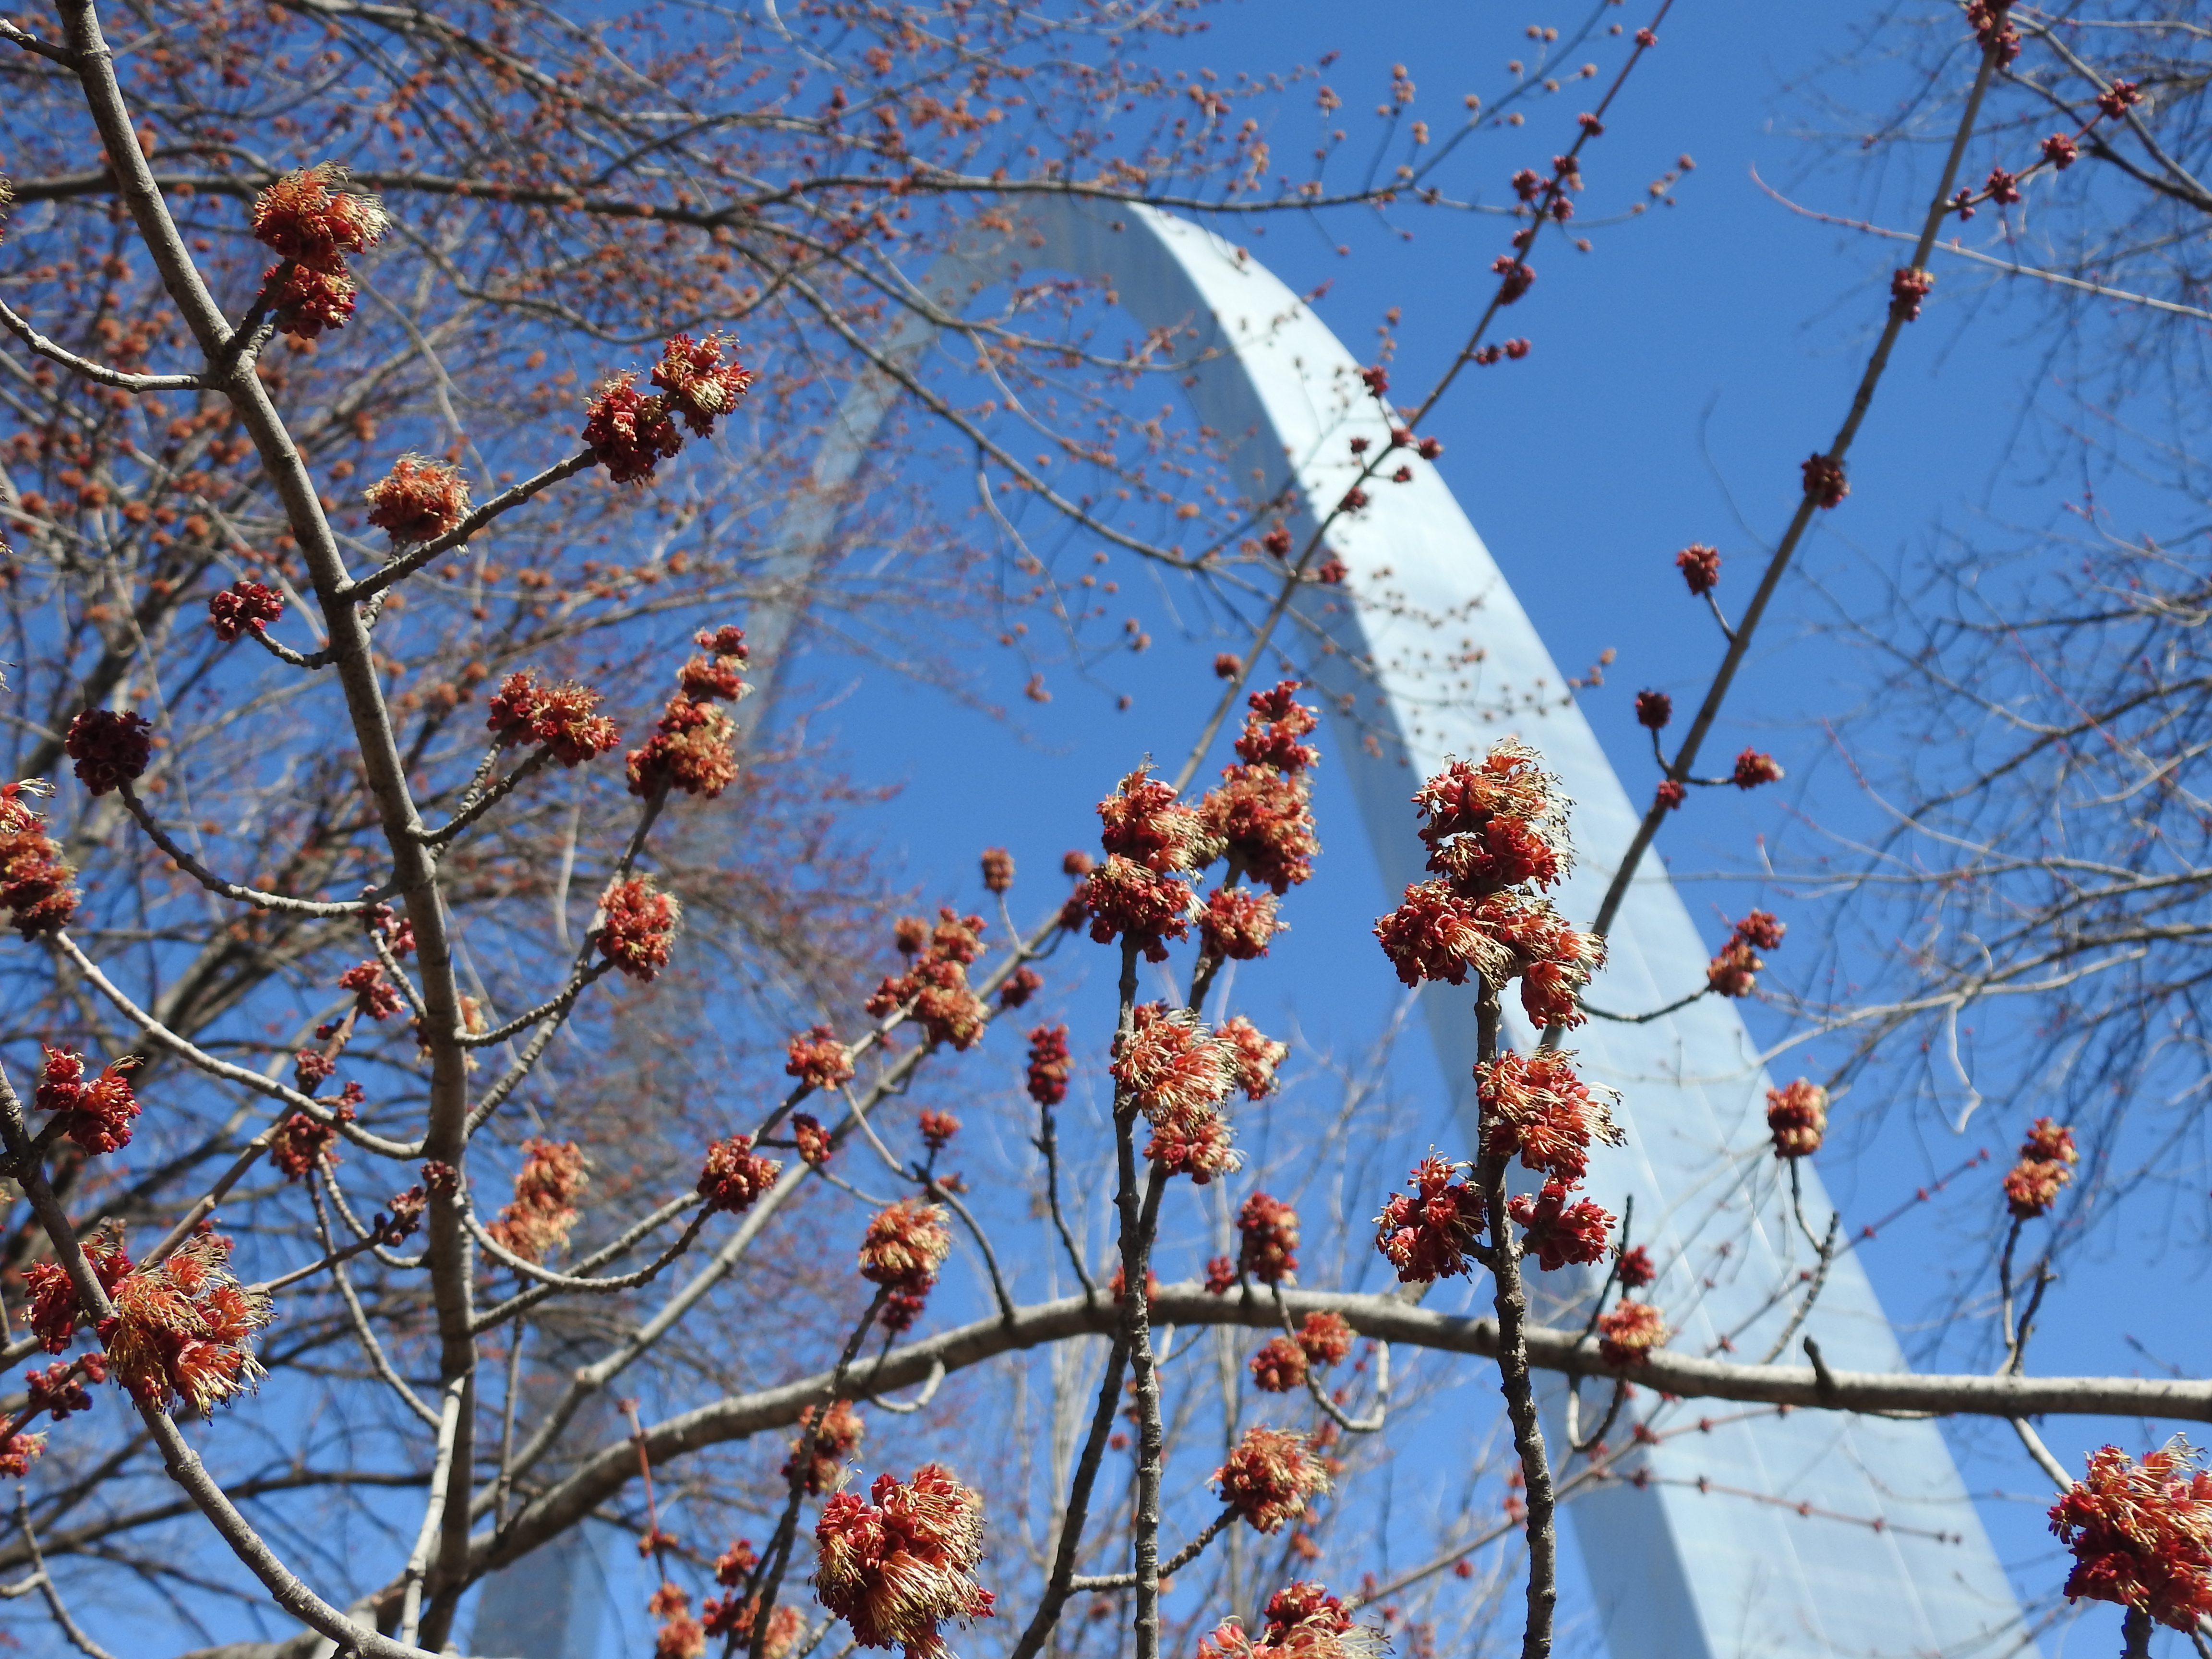 Brown tree branches with fluffy red blooms throughout. The gateway arch is in the background.